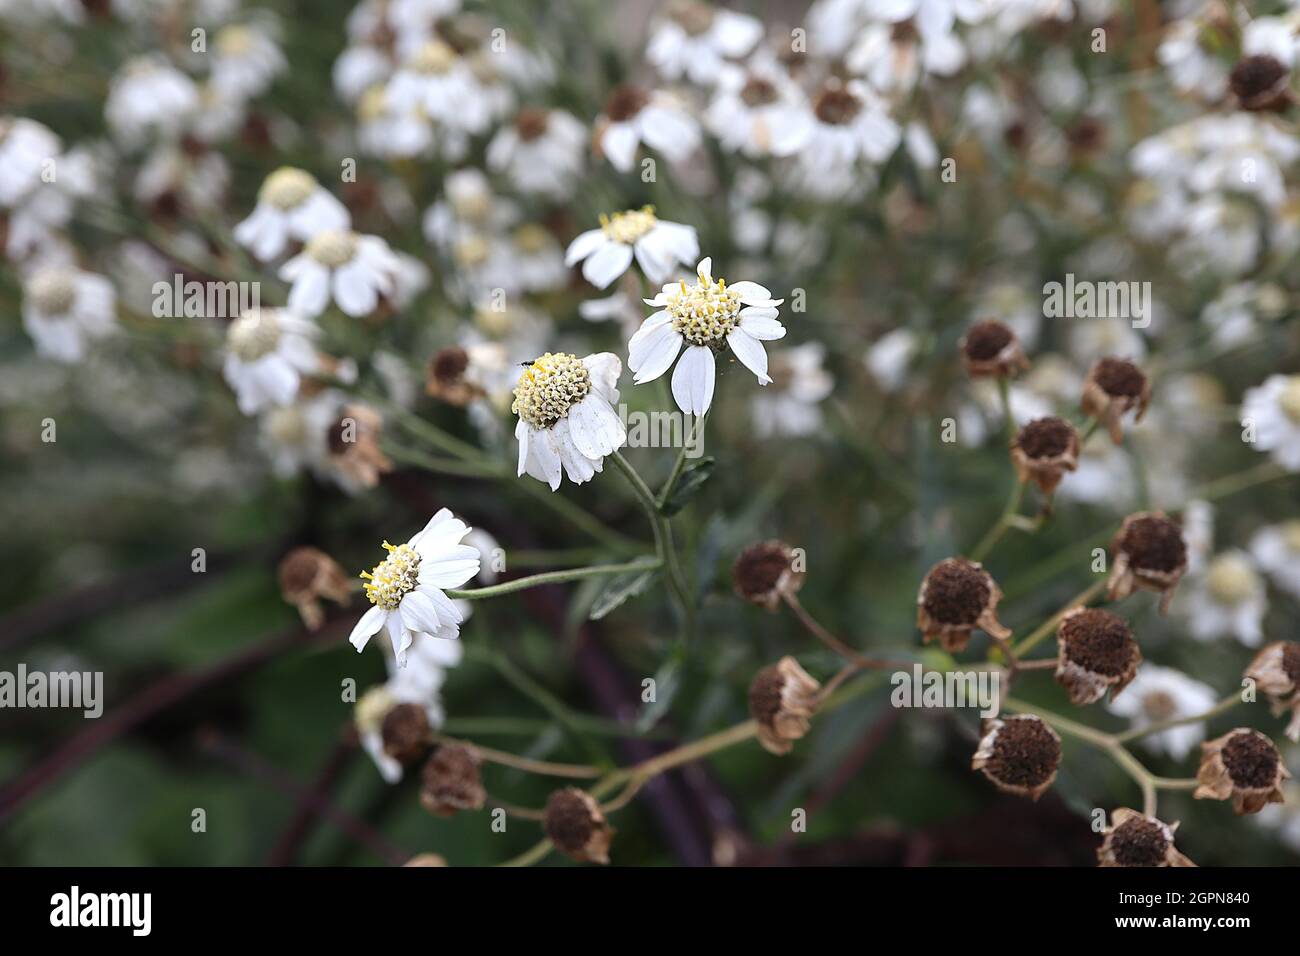 Achillea ptarmica ‘The Pearl’ sneezewort The Pearl – small white single flowers in loose clusters, tiny leaves on wiry stems,  September, England, UK Stock Photo